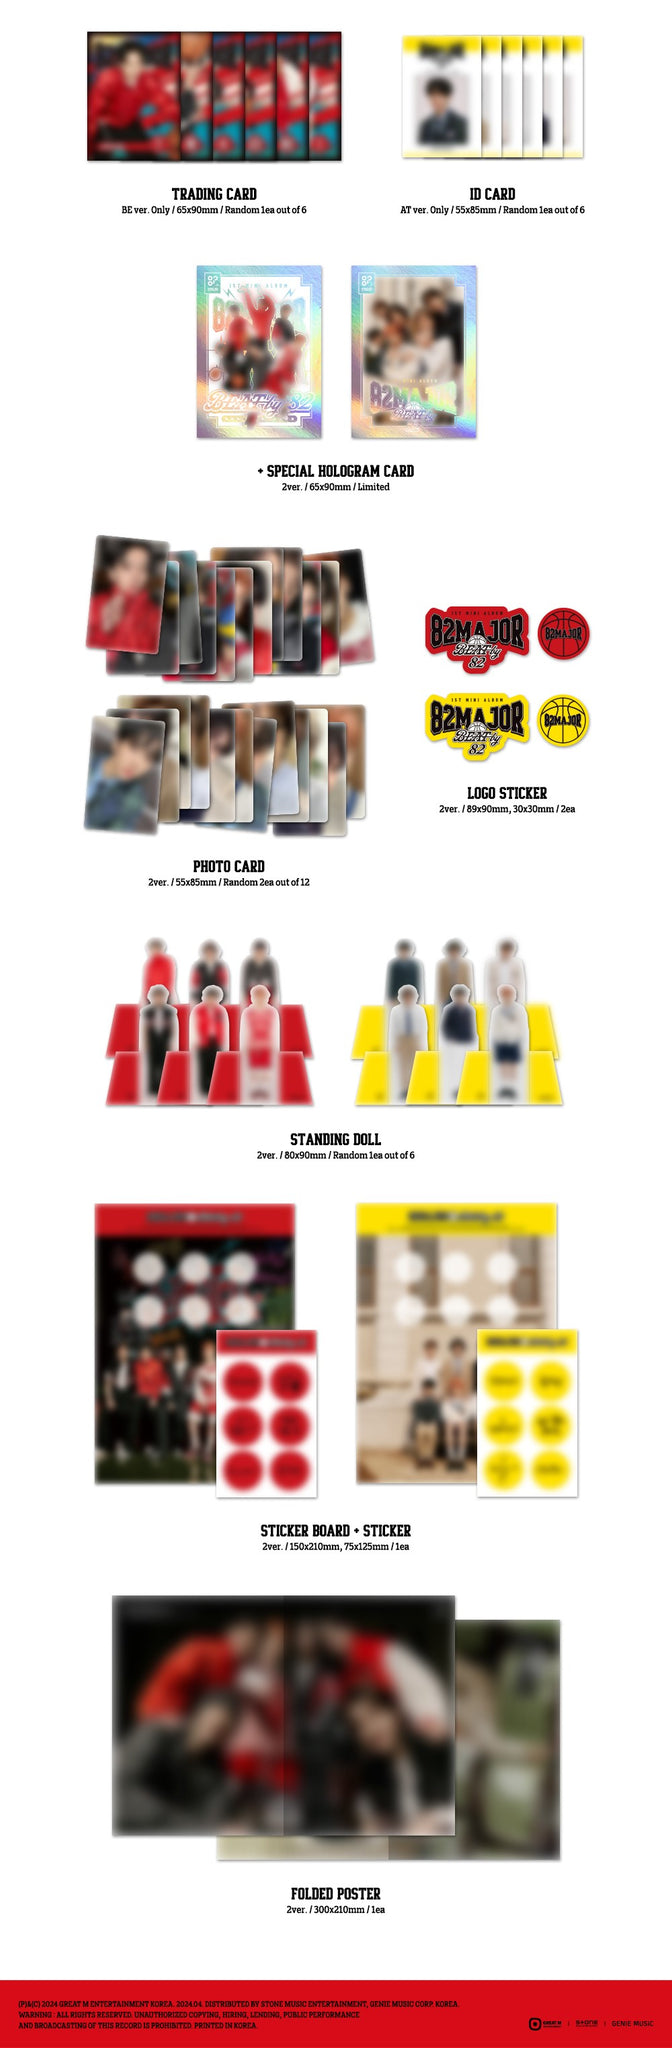 82MAJOR 1st Mini Album BEAT by 82 Inclusions: Trading Card (BE Ver. Only), ID Card (AT Ver. Only), Photocards, Logo Stickers, Standing Doll, Sticker Board + Sticker, Folded Poster, 1st Press Only Special Hologram Card